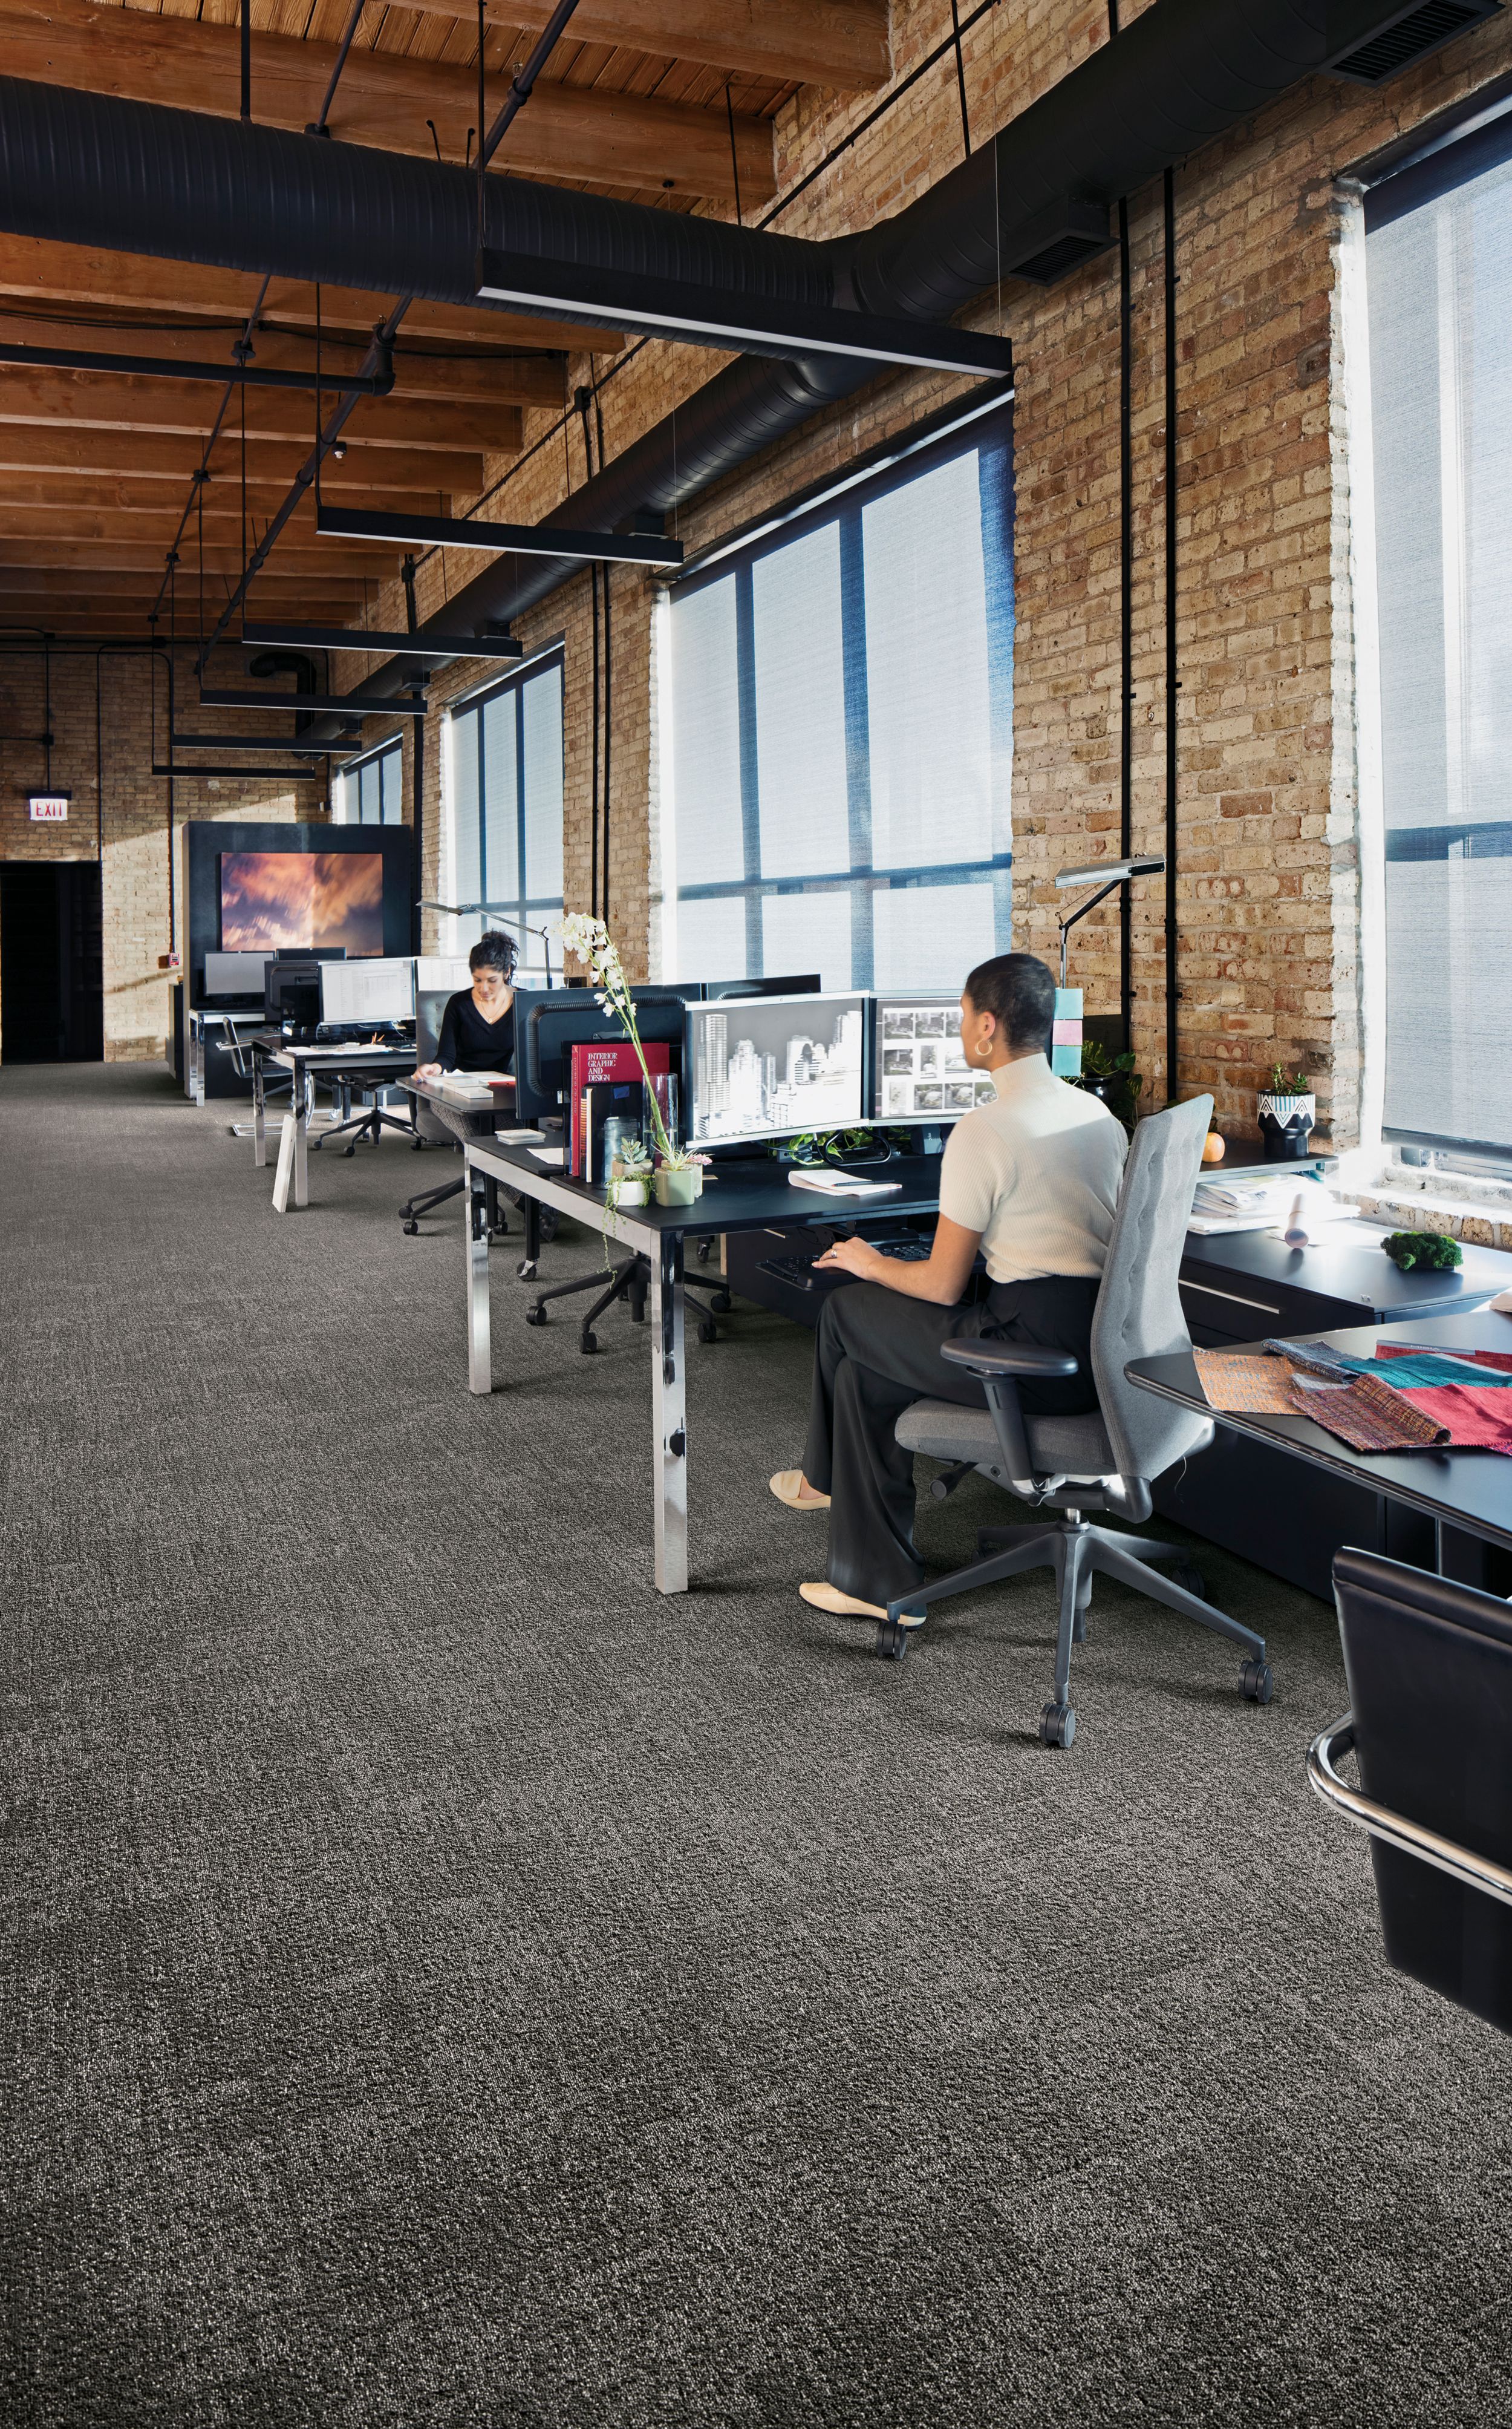 image Interface Step in Time carpet tile shown with office cubicles and brick walls numéro 8